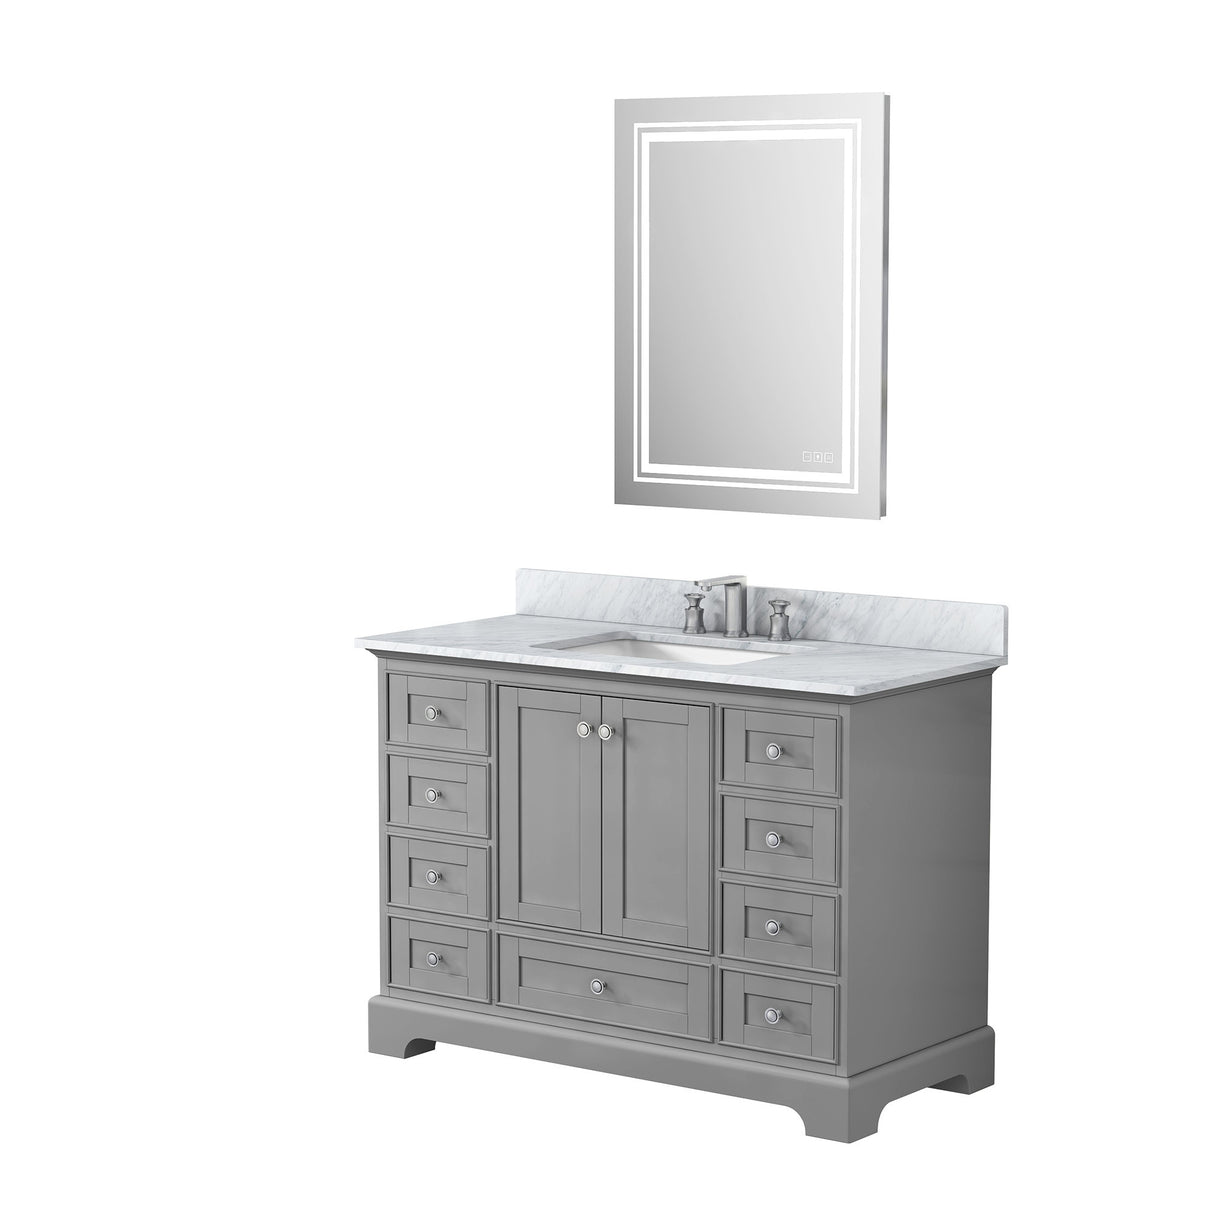 48" Gray Solid Wood Bathroom Vanity Set with Carrara White Natural Marble, CUPC Ceramic Sink and Three Hole Faucet Hole with Backsplash